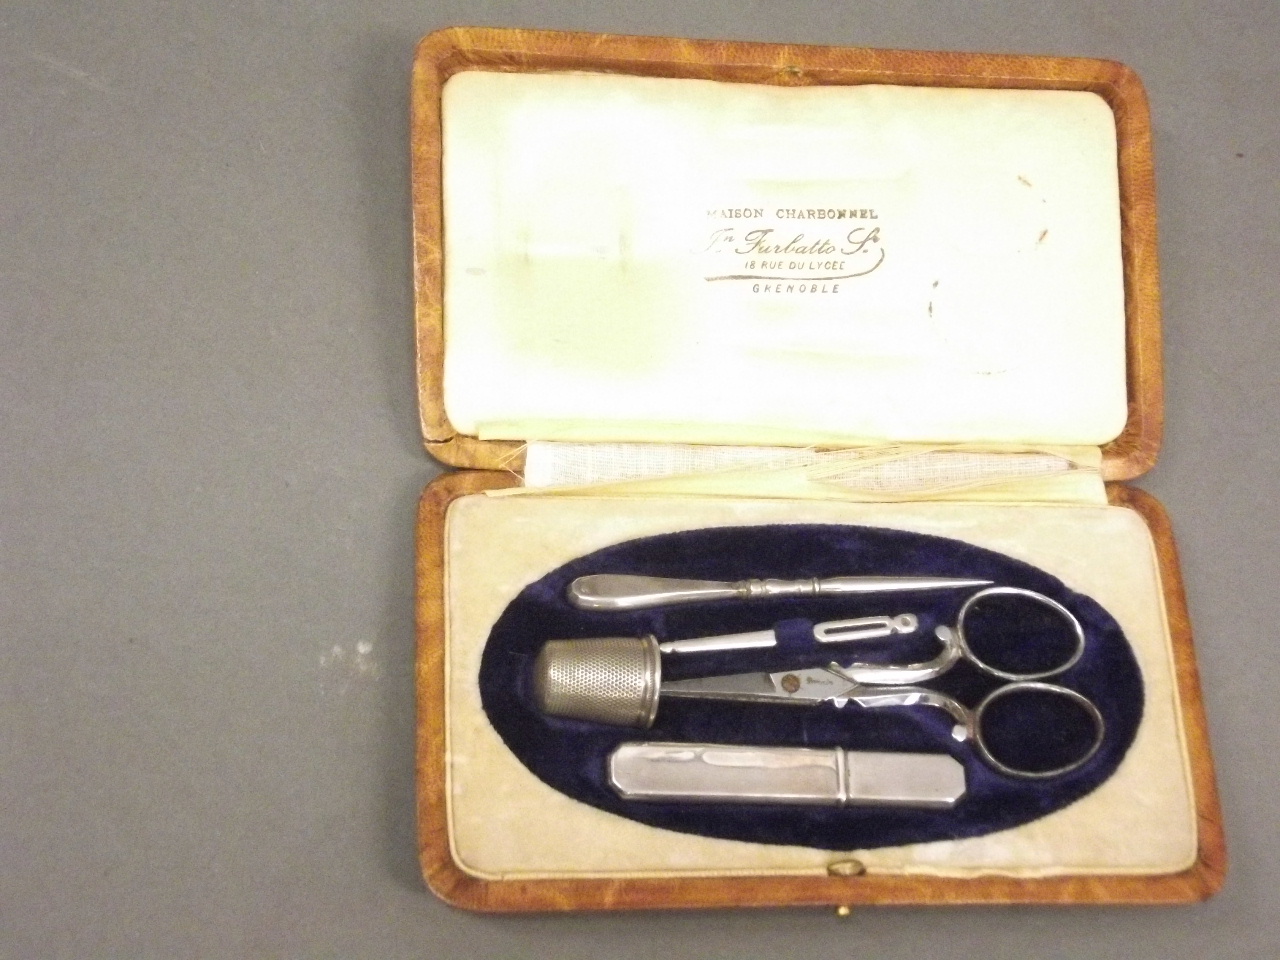 A late C19th manicure set in a leather case, marked 'Maison Charbonnel, Grenoble', 6" x 3"